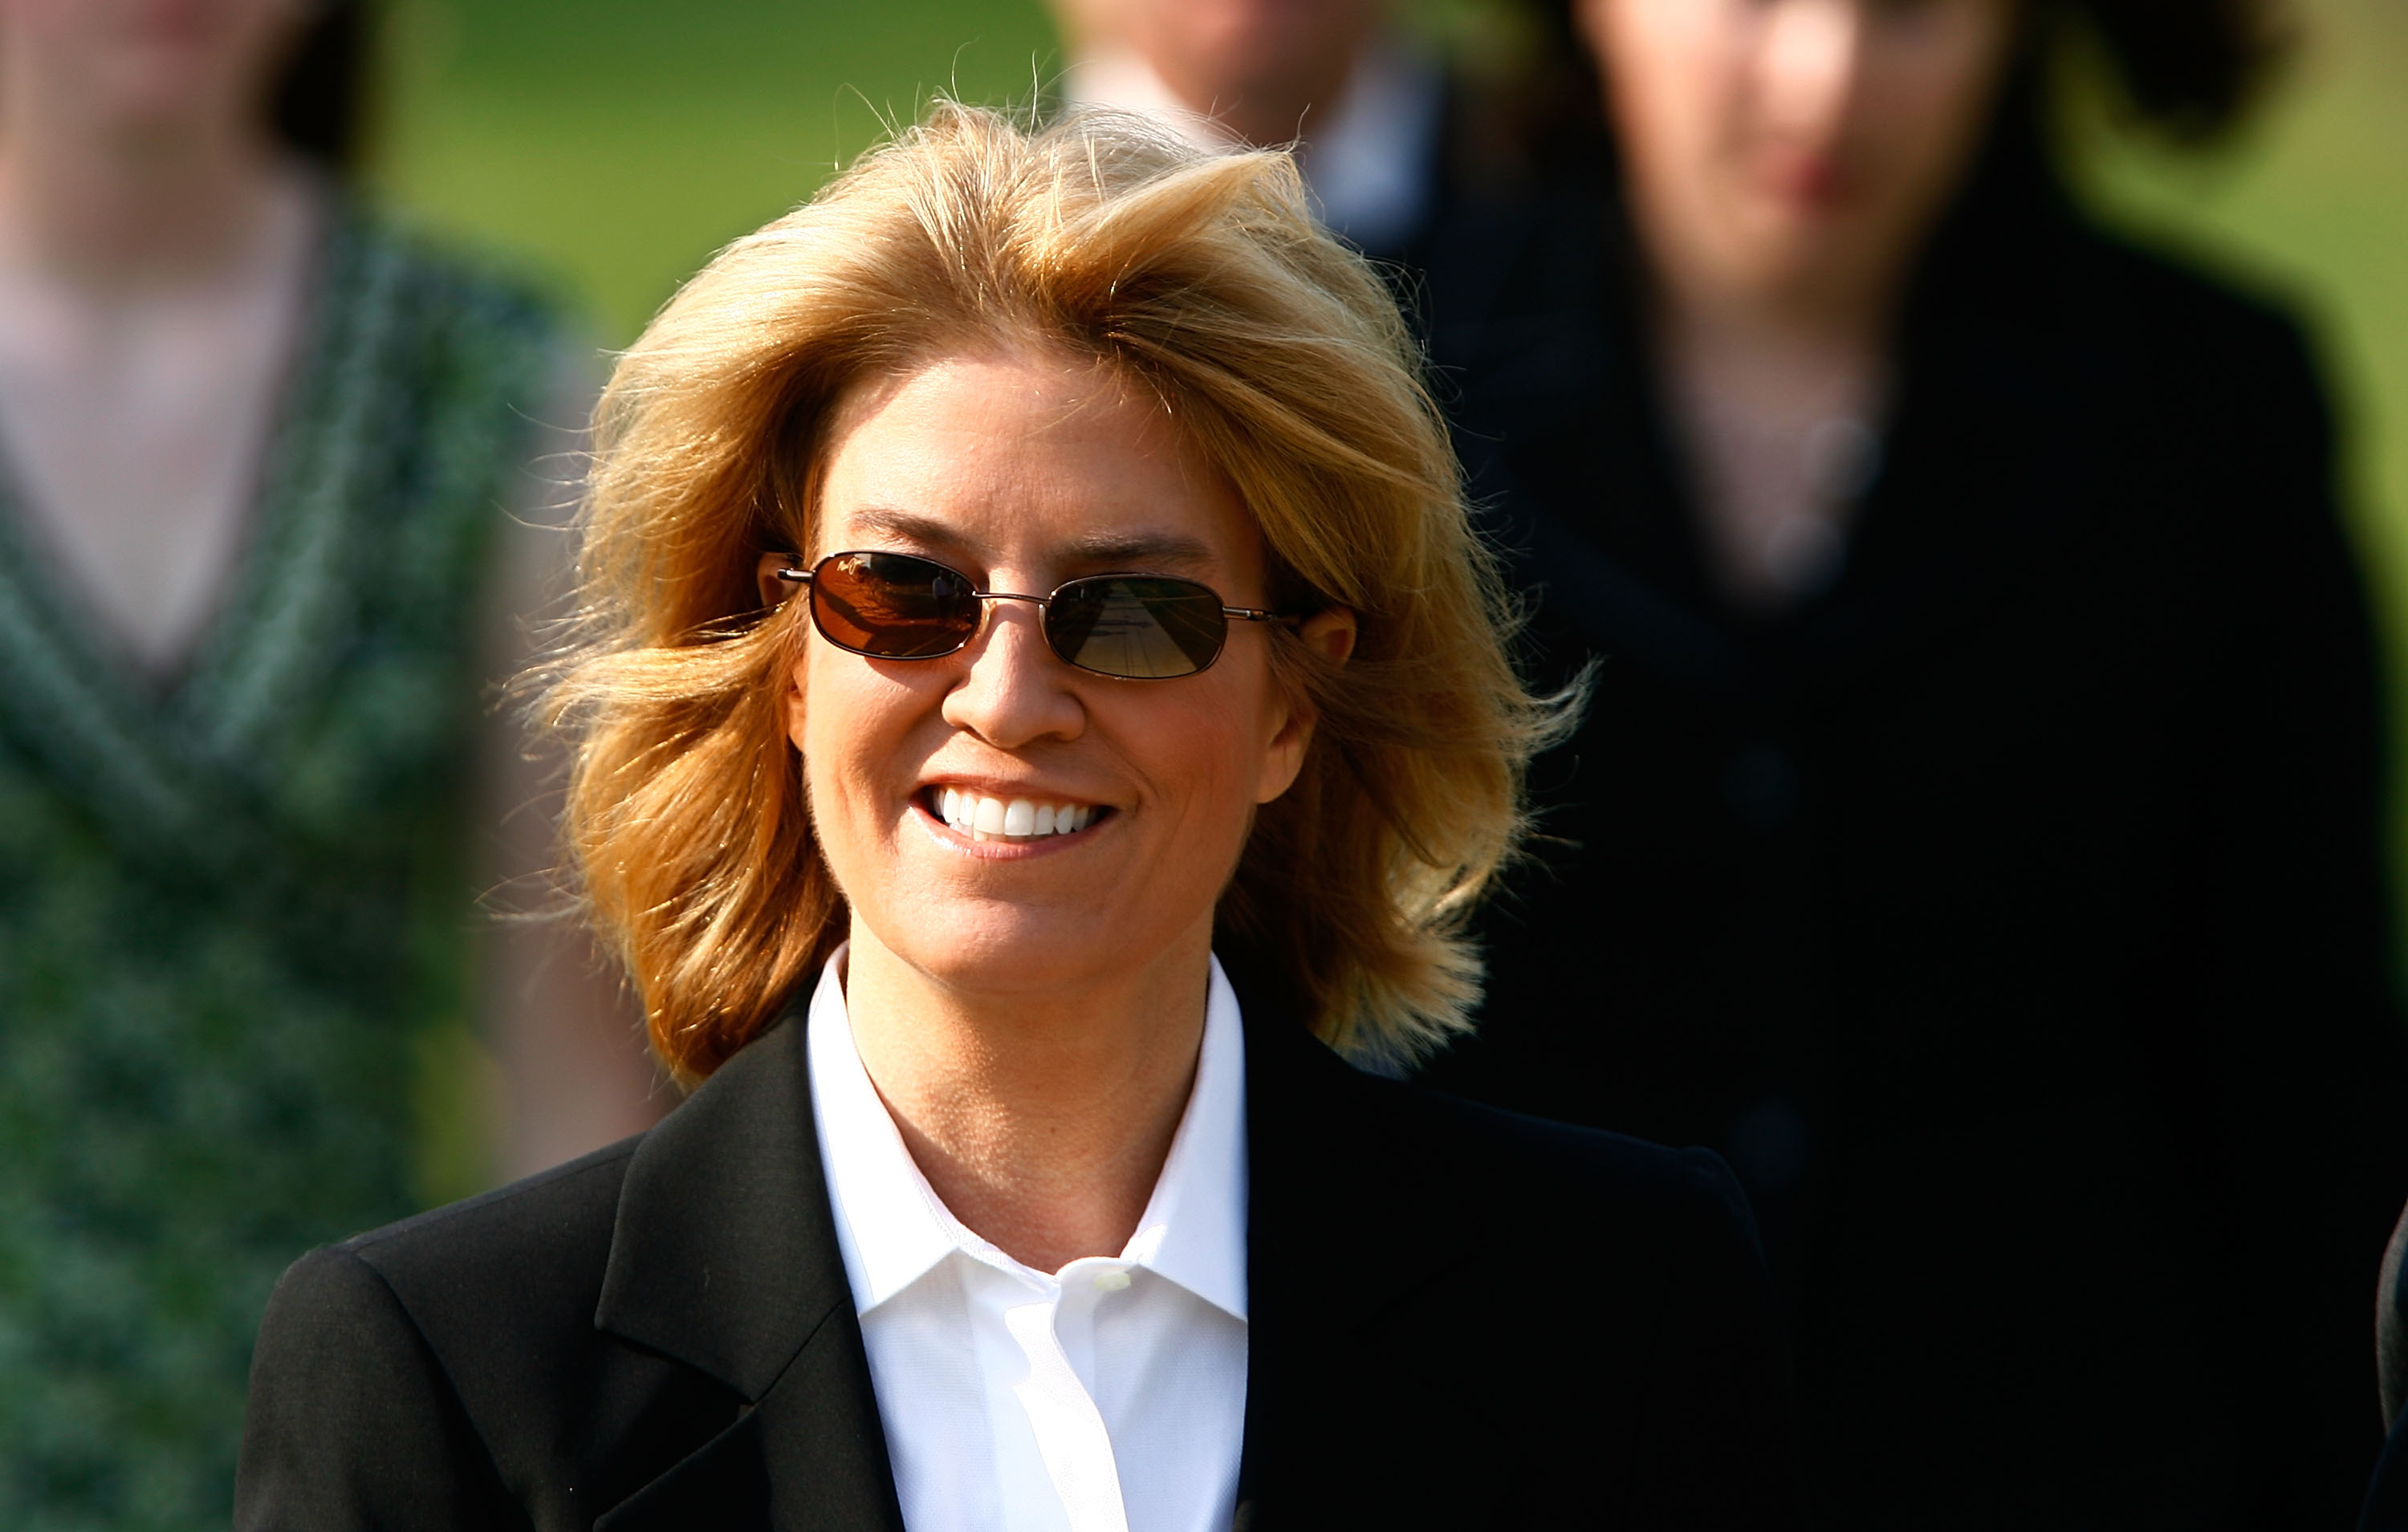 Former Fox News anchor Greta Van Susteren will join MSNBC, according to The...